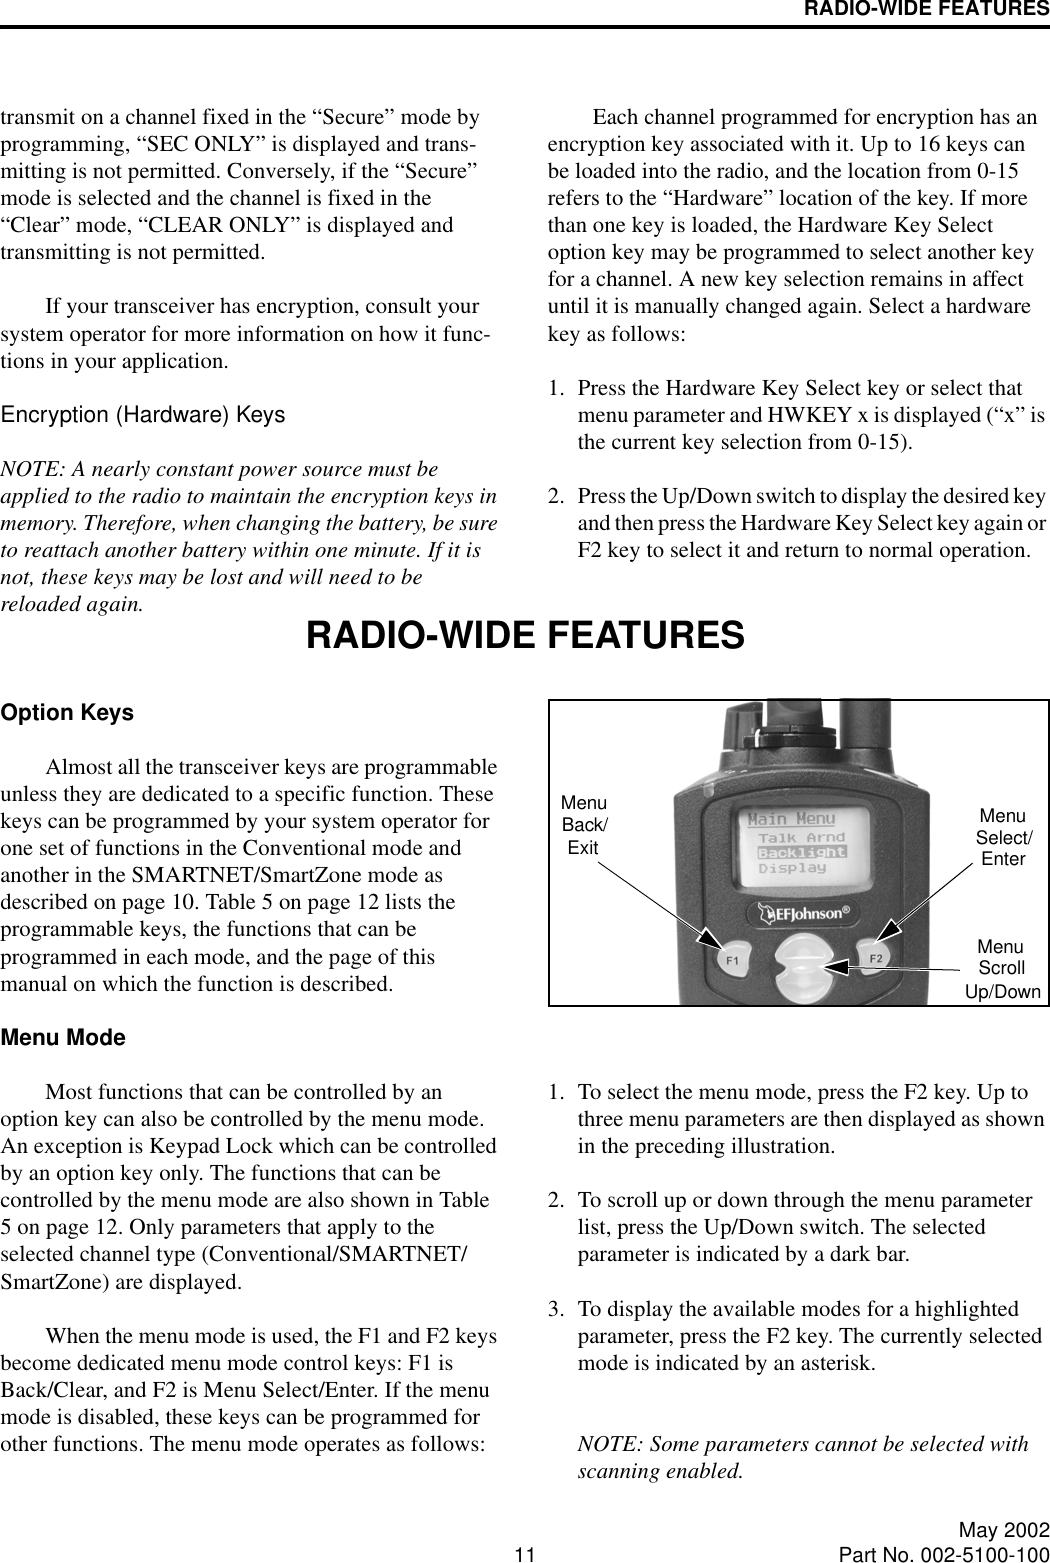 RADIO-WIDE FEATURES11 May 2002Part No. 002-5100-100transmit on a channel fixed in the “Secure” mode by programming, “SEC ONLY” is displayed and trans-mitting is not permitted. Conversely, if the “Secure” mode is selected and the channel is fixed in the “Clear” mode, “CLEAR ONLY” is displayed and transmitting is not permitted. If your transceiver has encryption, consult your system operator for more information on how it func-tions in your application.Encryption (Hardware) KeysNOTE: A nearly constant power source must be applied to the radio to maintain the encryption keys in memory. Therefore, when changing the battery, be sure to reattach another battery within one minute. If it is not, these keys may be lost and will need to be reloaded again.Each channel programmed for encryption has an encryption key associated with it. Up to 16 keys can be loaded into the radio, and the location from 0-15 refers to the “Hardware” location of the key. If more than one key is loaded, the Hardware Key Select option key may be programmed to select another key for a channel. A new key selection remains in affect until it is manually changed again. Select a hardware key as follows:1. Press the Hardware Key Select key or select that menu parameter and HWKEY x is displayed (“x” is the current key selection from 0-15).2. Press the Up/Down switch to display the desired key and then press the Hardware Key Select key again or F2 key to select it and return to normal operation.RADIO-WIDE FEATURESOption KeysAlmost all the transceiver keys are programmable unless they are dedicated to a specific function. These keys can be programmed by your system operator for one set of functions in the Conventional mode and another in the SMARTNET/SmartZone mode as described on page 10. Table 5 on page 12 lists the programmable keys, the functions that can be programmed in each mode, and the page of this manual on which the function is described.Menu ModeMost functions that can be controlled by an option key can also be controlled by the menu mode. An exception is Keypad Lock which can be controlled by an option key only. The functions that can be controlled by the menu mode are also shown in Table 5 on page 12. Only parameters that apply to the selected channel type (Conventional/SMARTNET/SmartZone) are displayed. When the menu mode is used, the F1 and F2 keys become dedicated menu mode control keys: F1 is Back/Clear, and F2 is Menu Select/Enter. If the menu mode is disabled, these keys can be programmed for other functions. The menu mode operates as follows:1. To select the menu mode, press the F2 key. Up to three menu parameters are then displayed as shown in the preceding illustration.2. To scroll up or down through the menu parameter list, press the Up/Down switch. The selected parameter is indicated by a dark bar.3. To display the available modes for a highlighted parameter, press the F2 key. The currently selected mode is indicated by an asterisk.NOTE: Some parameters cannot be selected with scanning enabled.MenuExitBack/ MenuSelect/EnterMenuScrollUp/Down